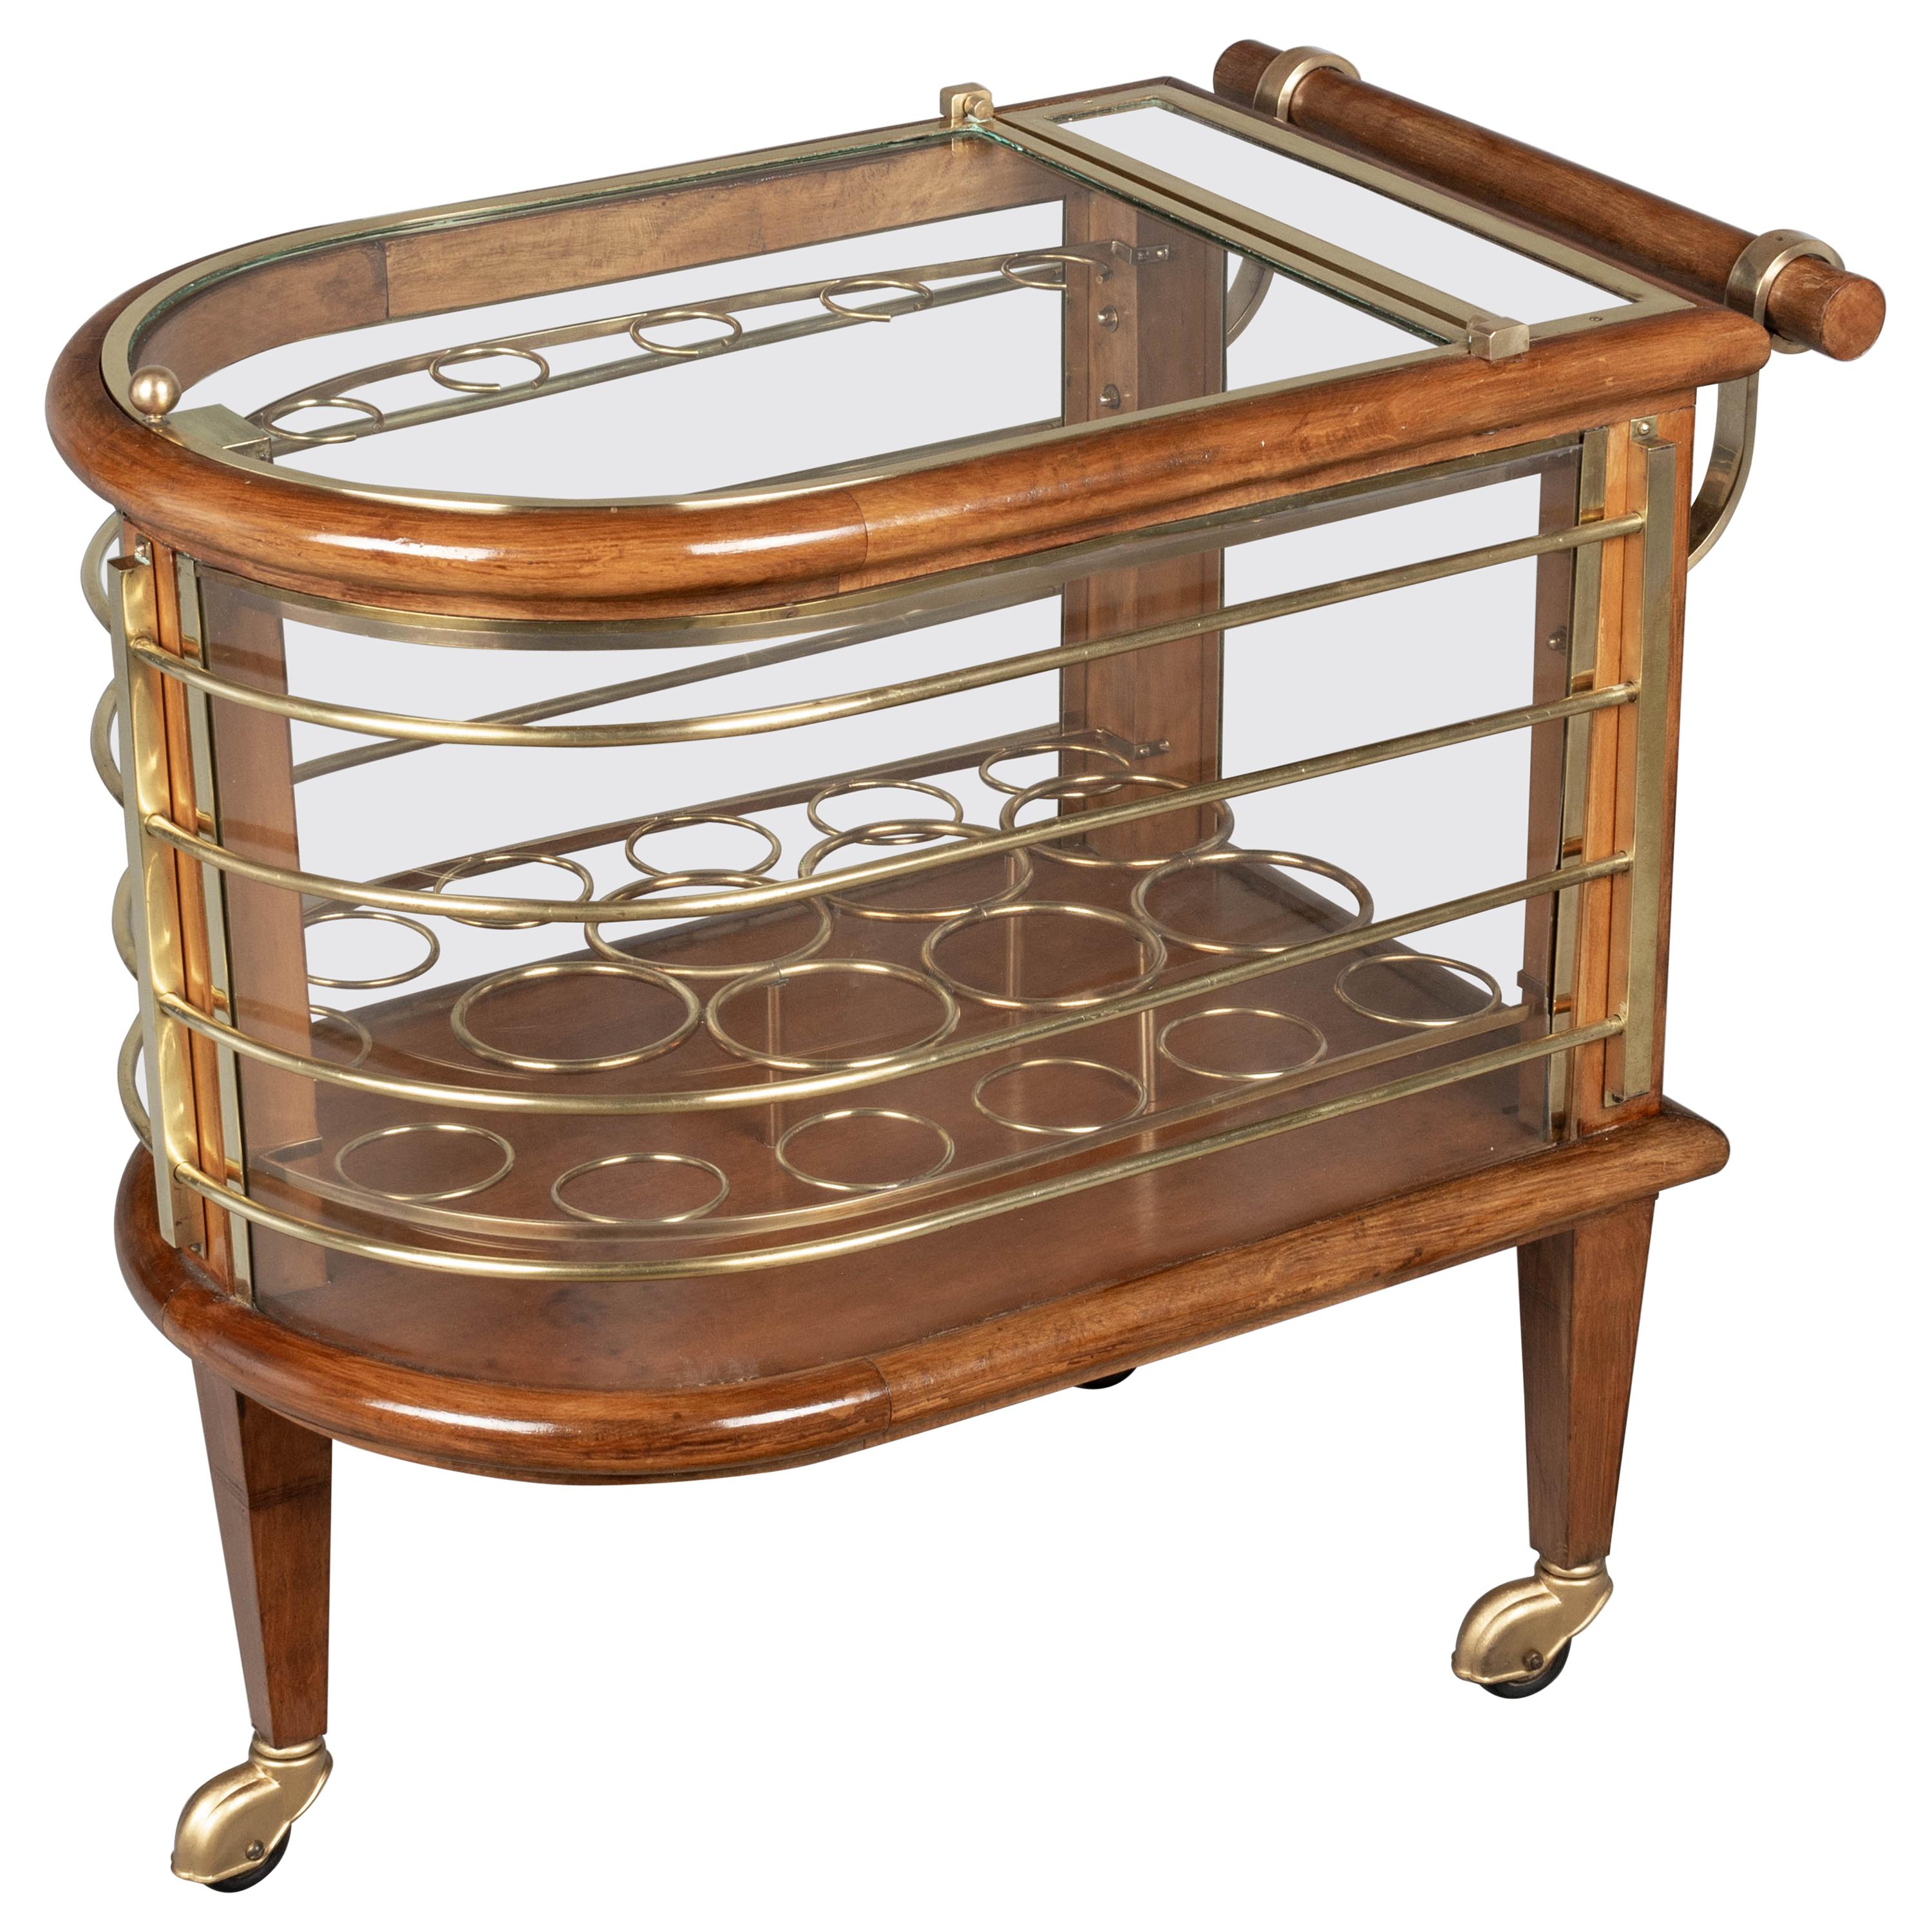 French Art Deco Style Bar Cart, or Cocktail Trolley by Louis Sognot